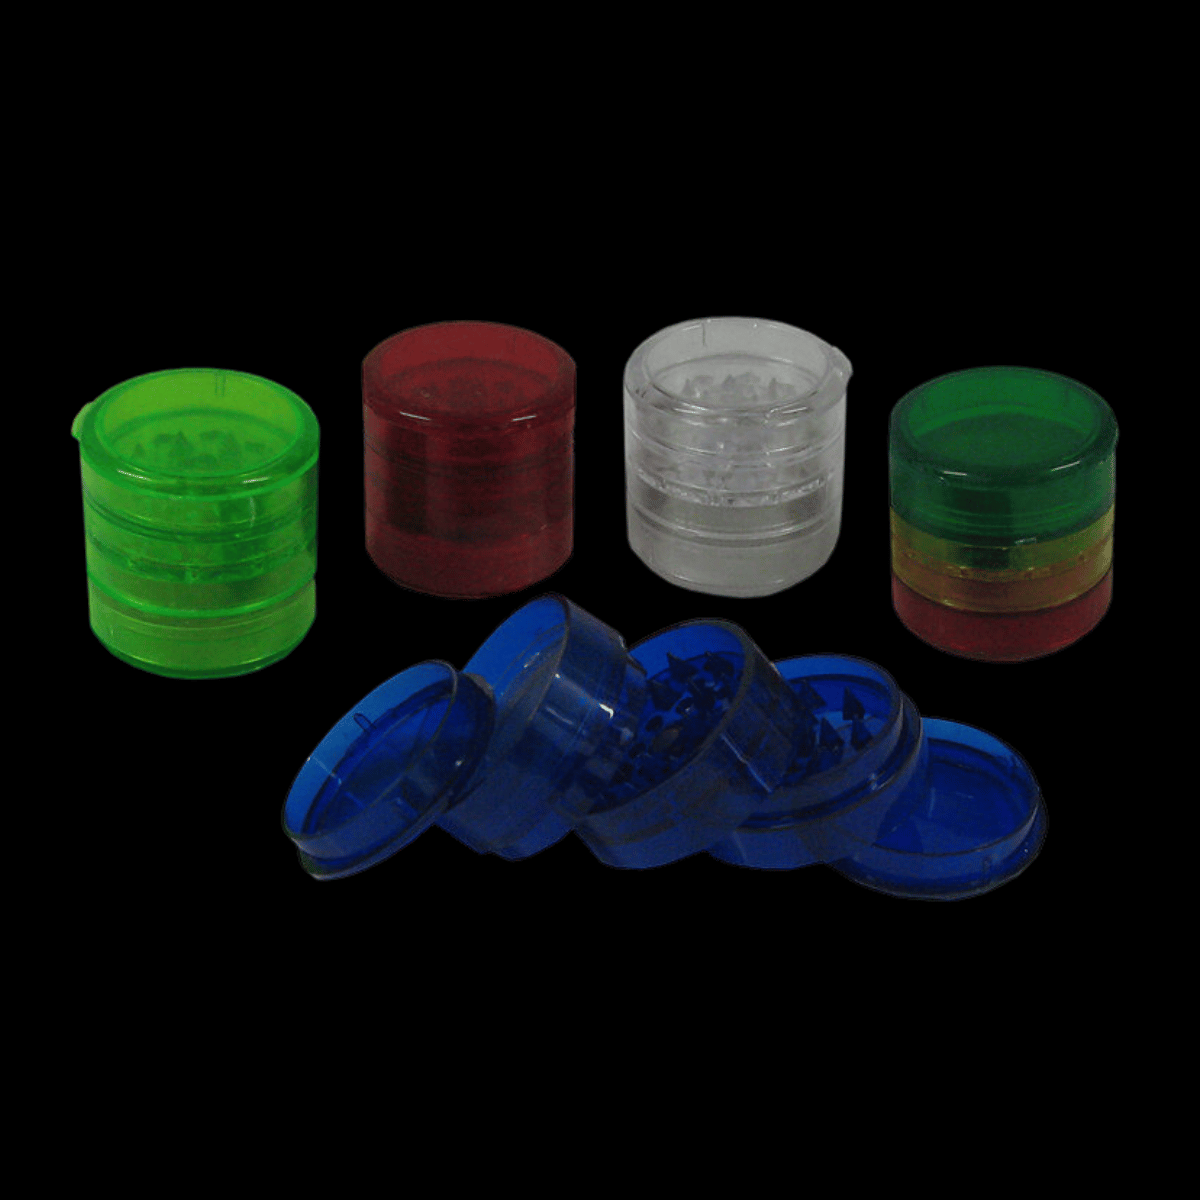 5 Part Coloured Acrylic Herb Grinder with Mesh Gauze